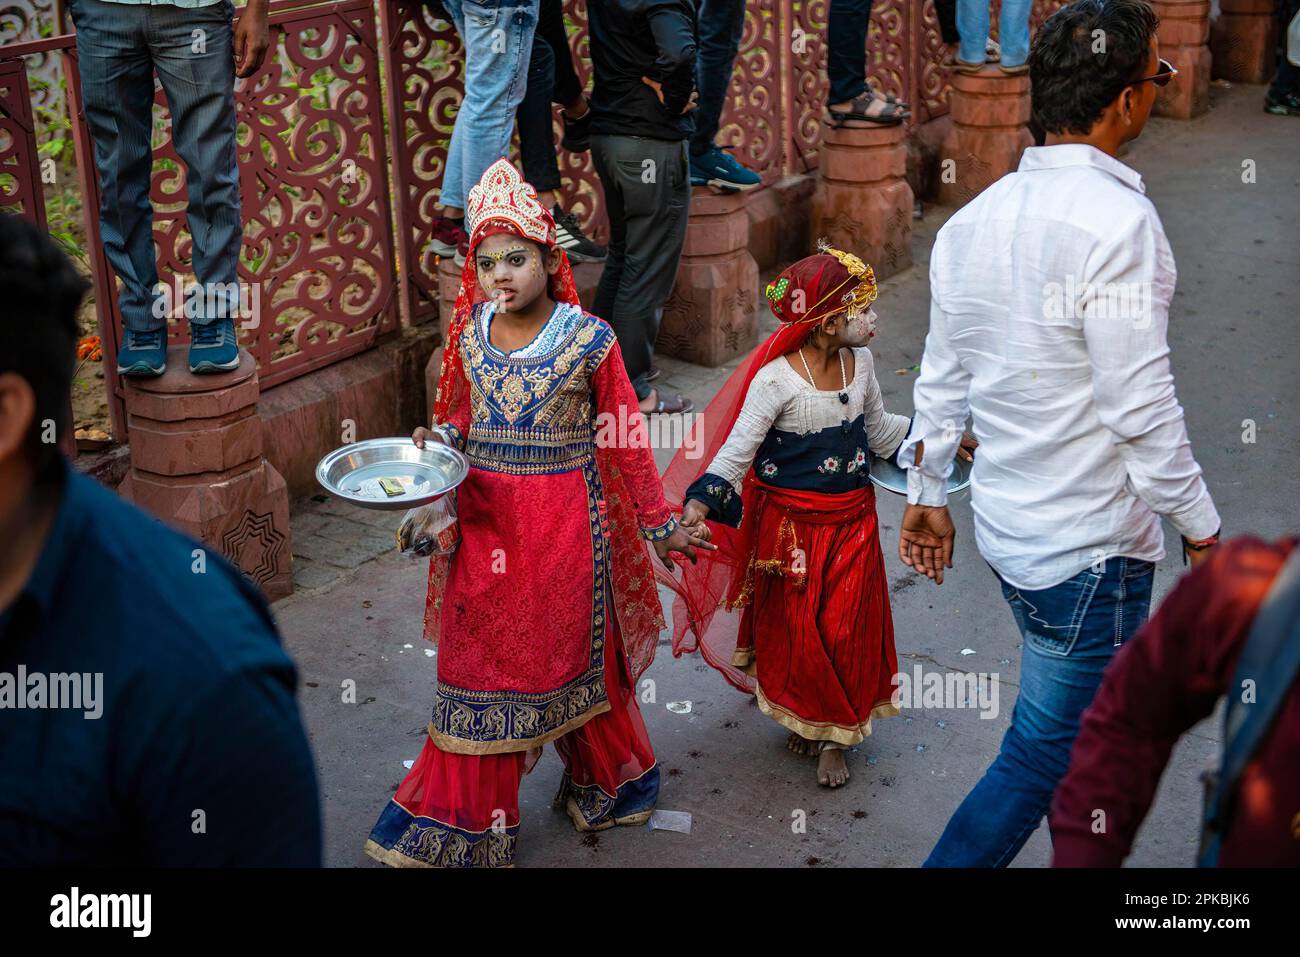 Young girls dressed like Goddess, beg for money during a procession for the Hindu festival Hanuman Jayanti. The festival commemorates the birth of the Hindu deity Hanuman. Stock Photo